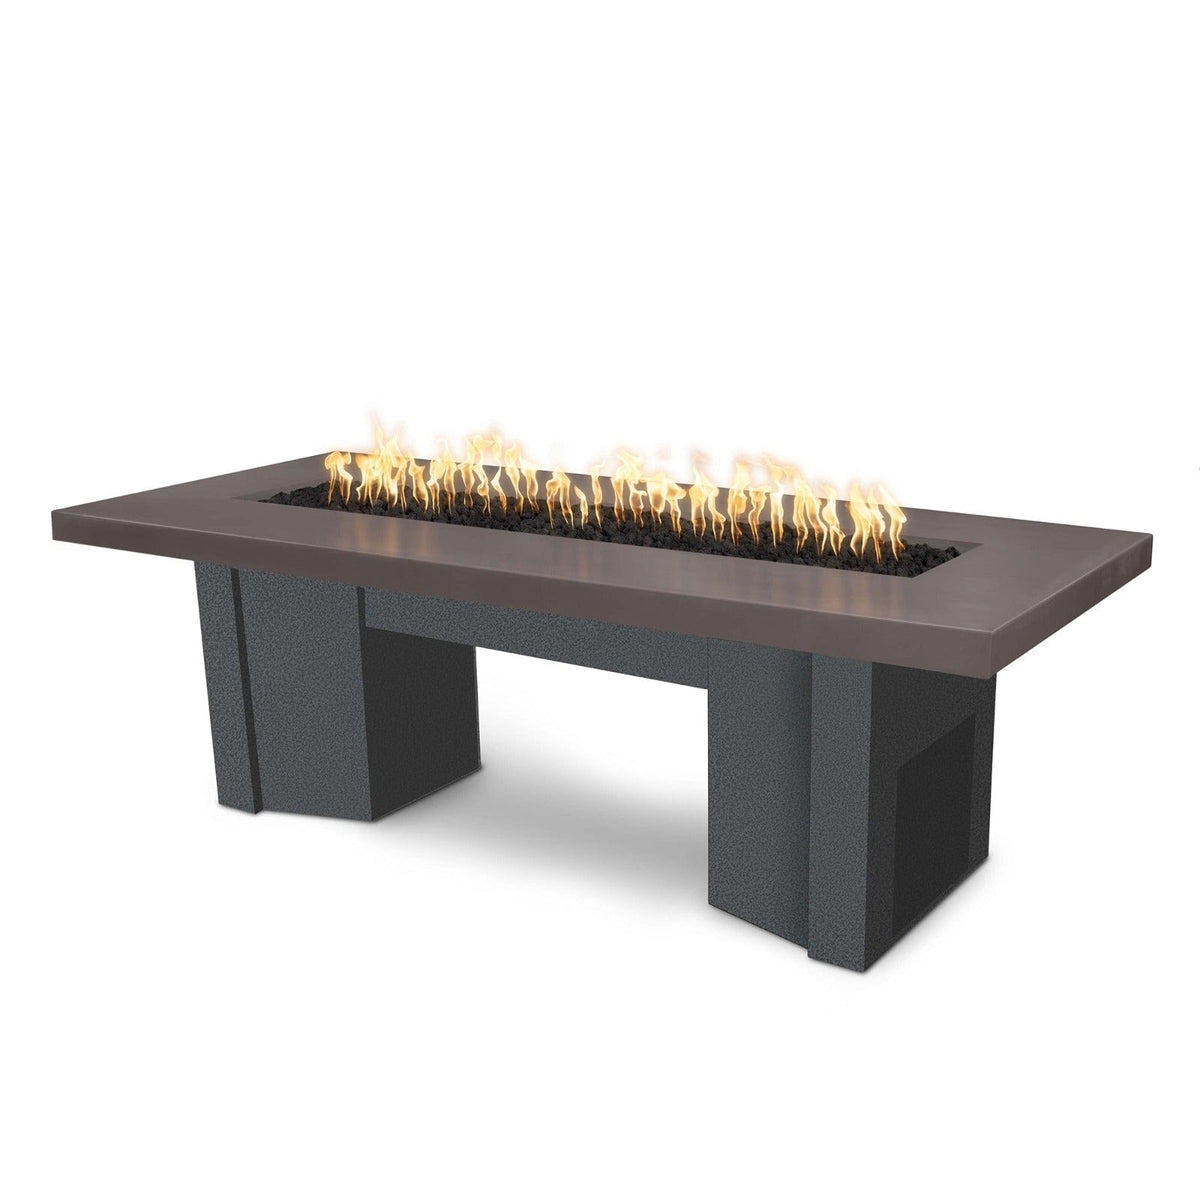 The Outdoor Plus Fire Features Chestnut (-CST) / Silver Vein Powder Coated Steel (-SLV) The Outdoor Plus 78&quot; Alameda Fire Table Smooth Concrete in Natural Gas - Match Lit with Flame Sense System / OPT-ALMGFRC78FSML-NG